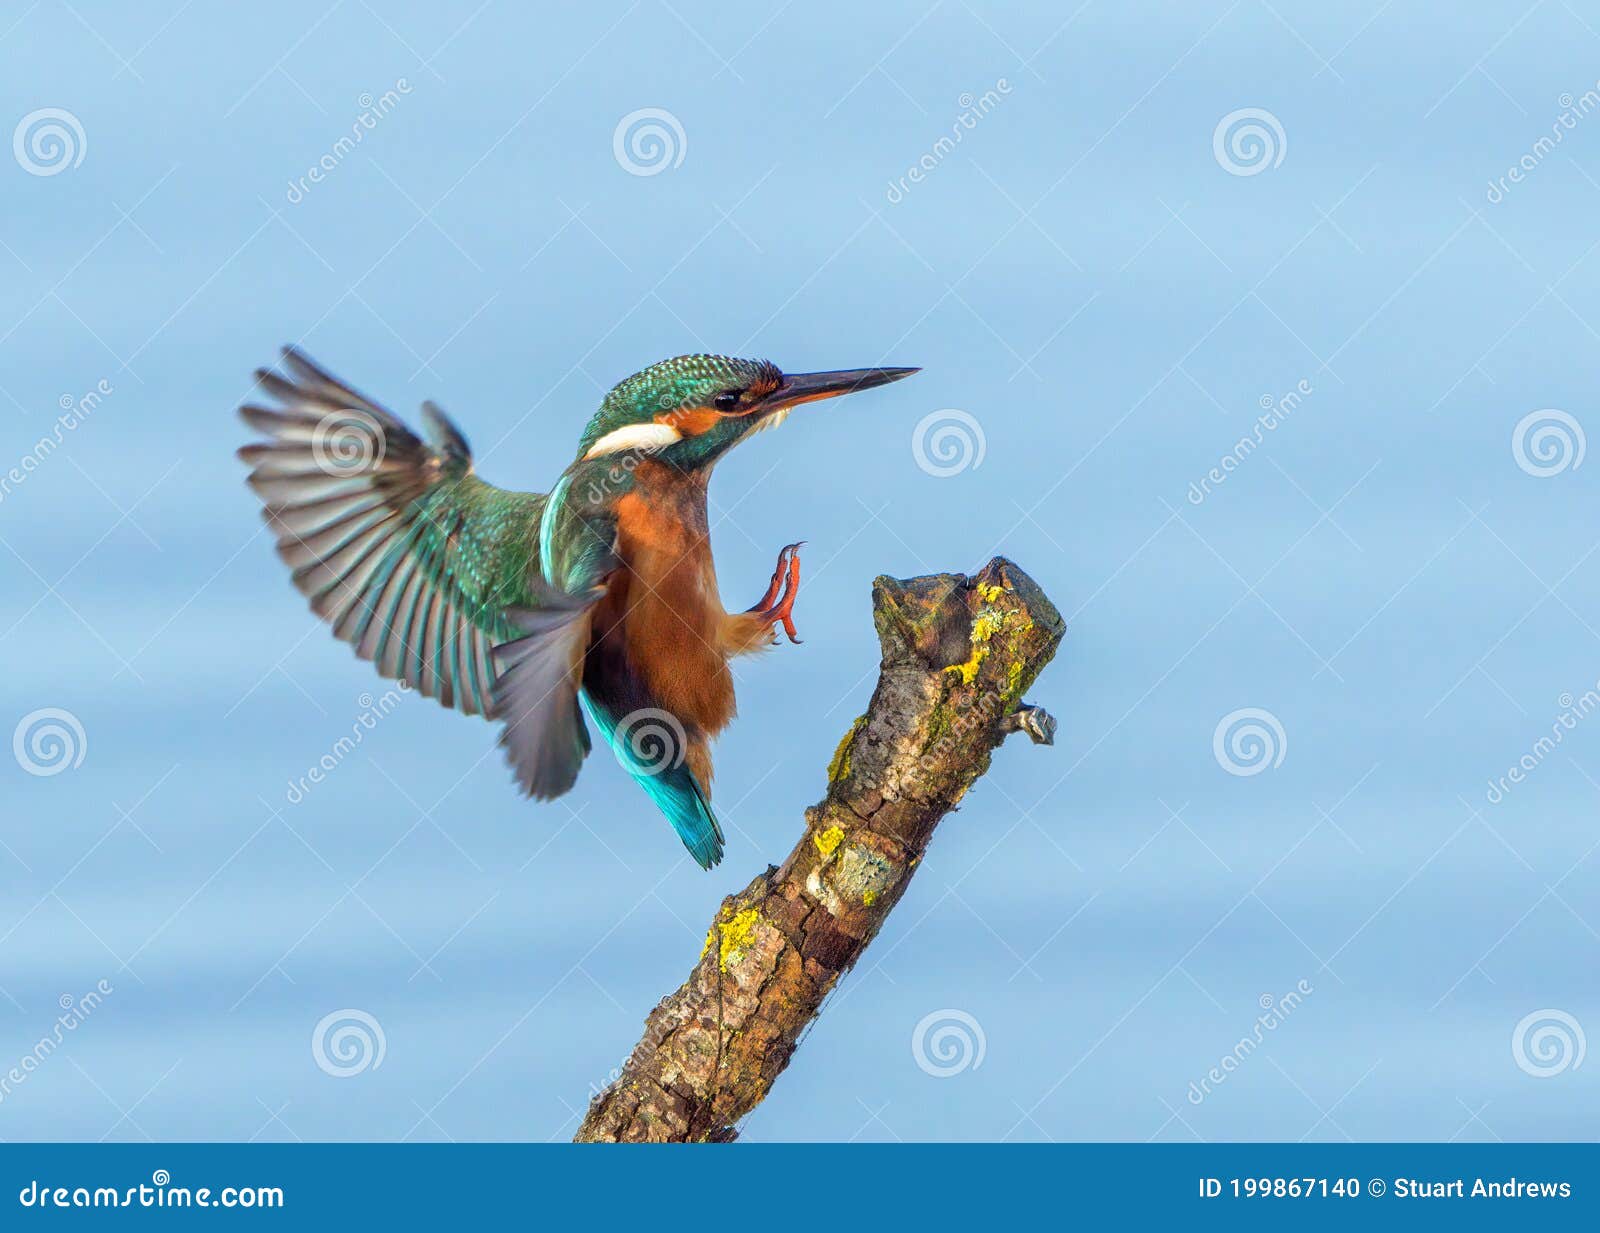 common kingfisher - alcedo atthis landing on a stick.